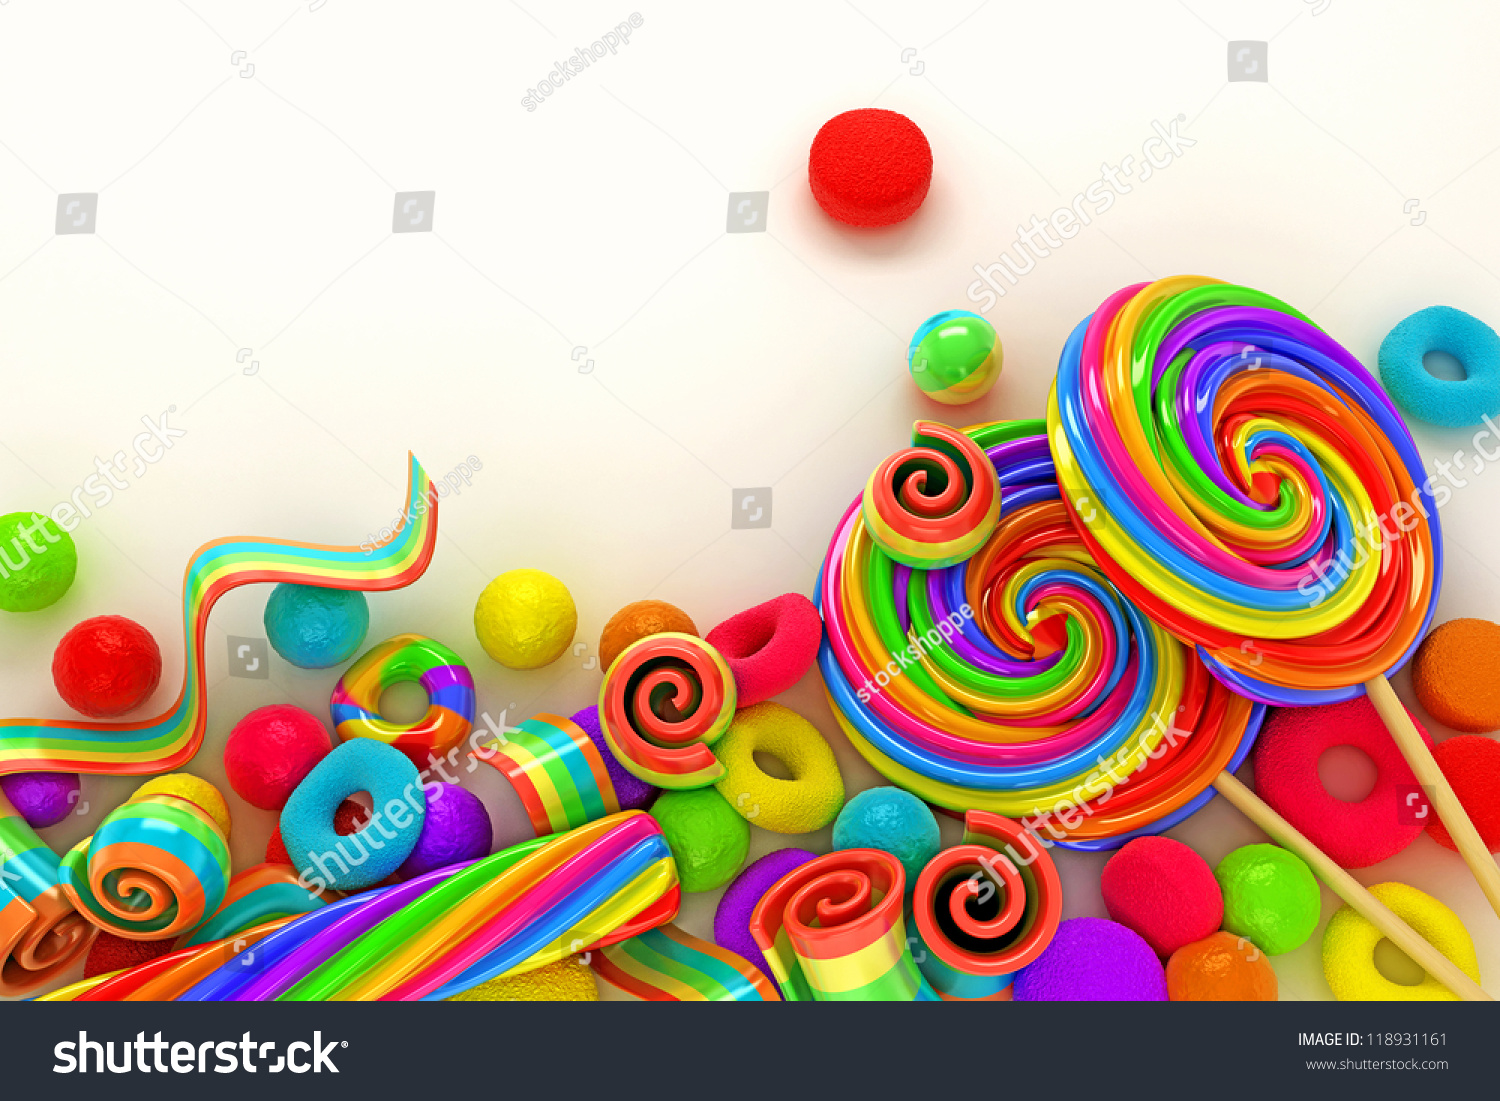 Illustration Colorful Candy Wallpaper Stock Illustration 118931161 ...